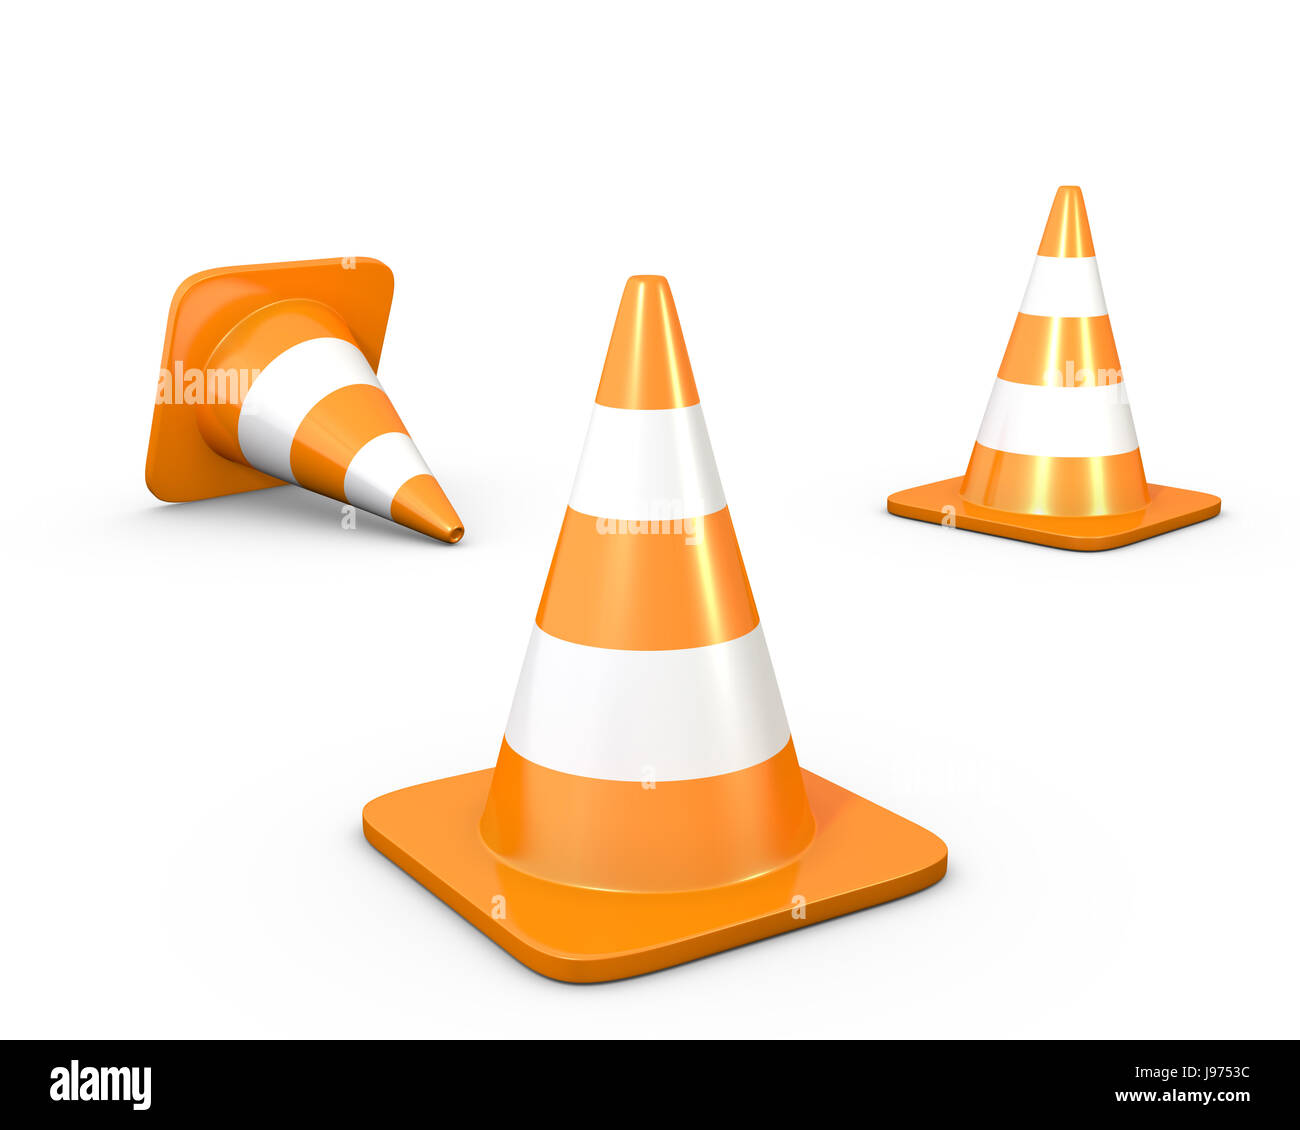 sign, signal, danger, isolated, traffic, transportation, accident, transport, Stock Photo